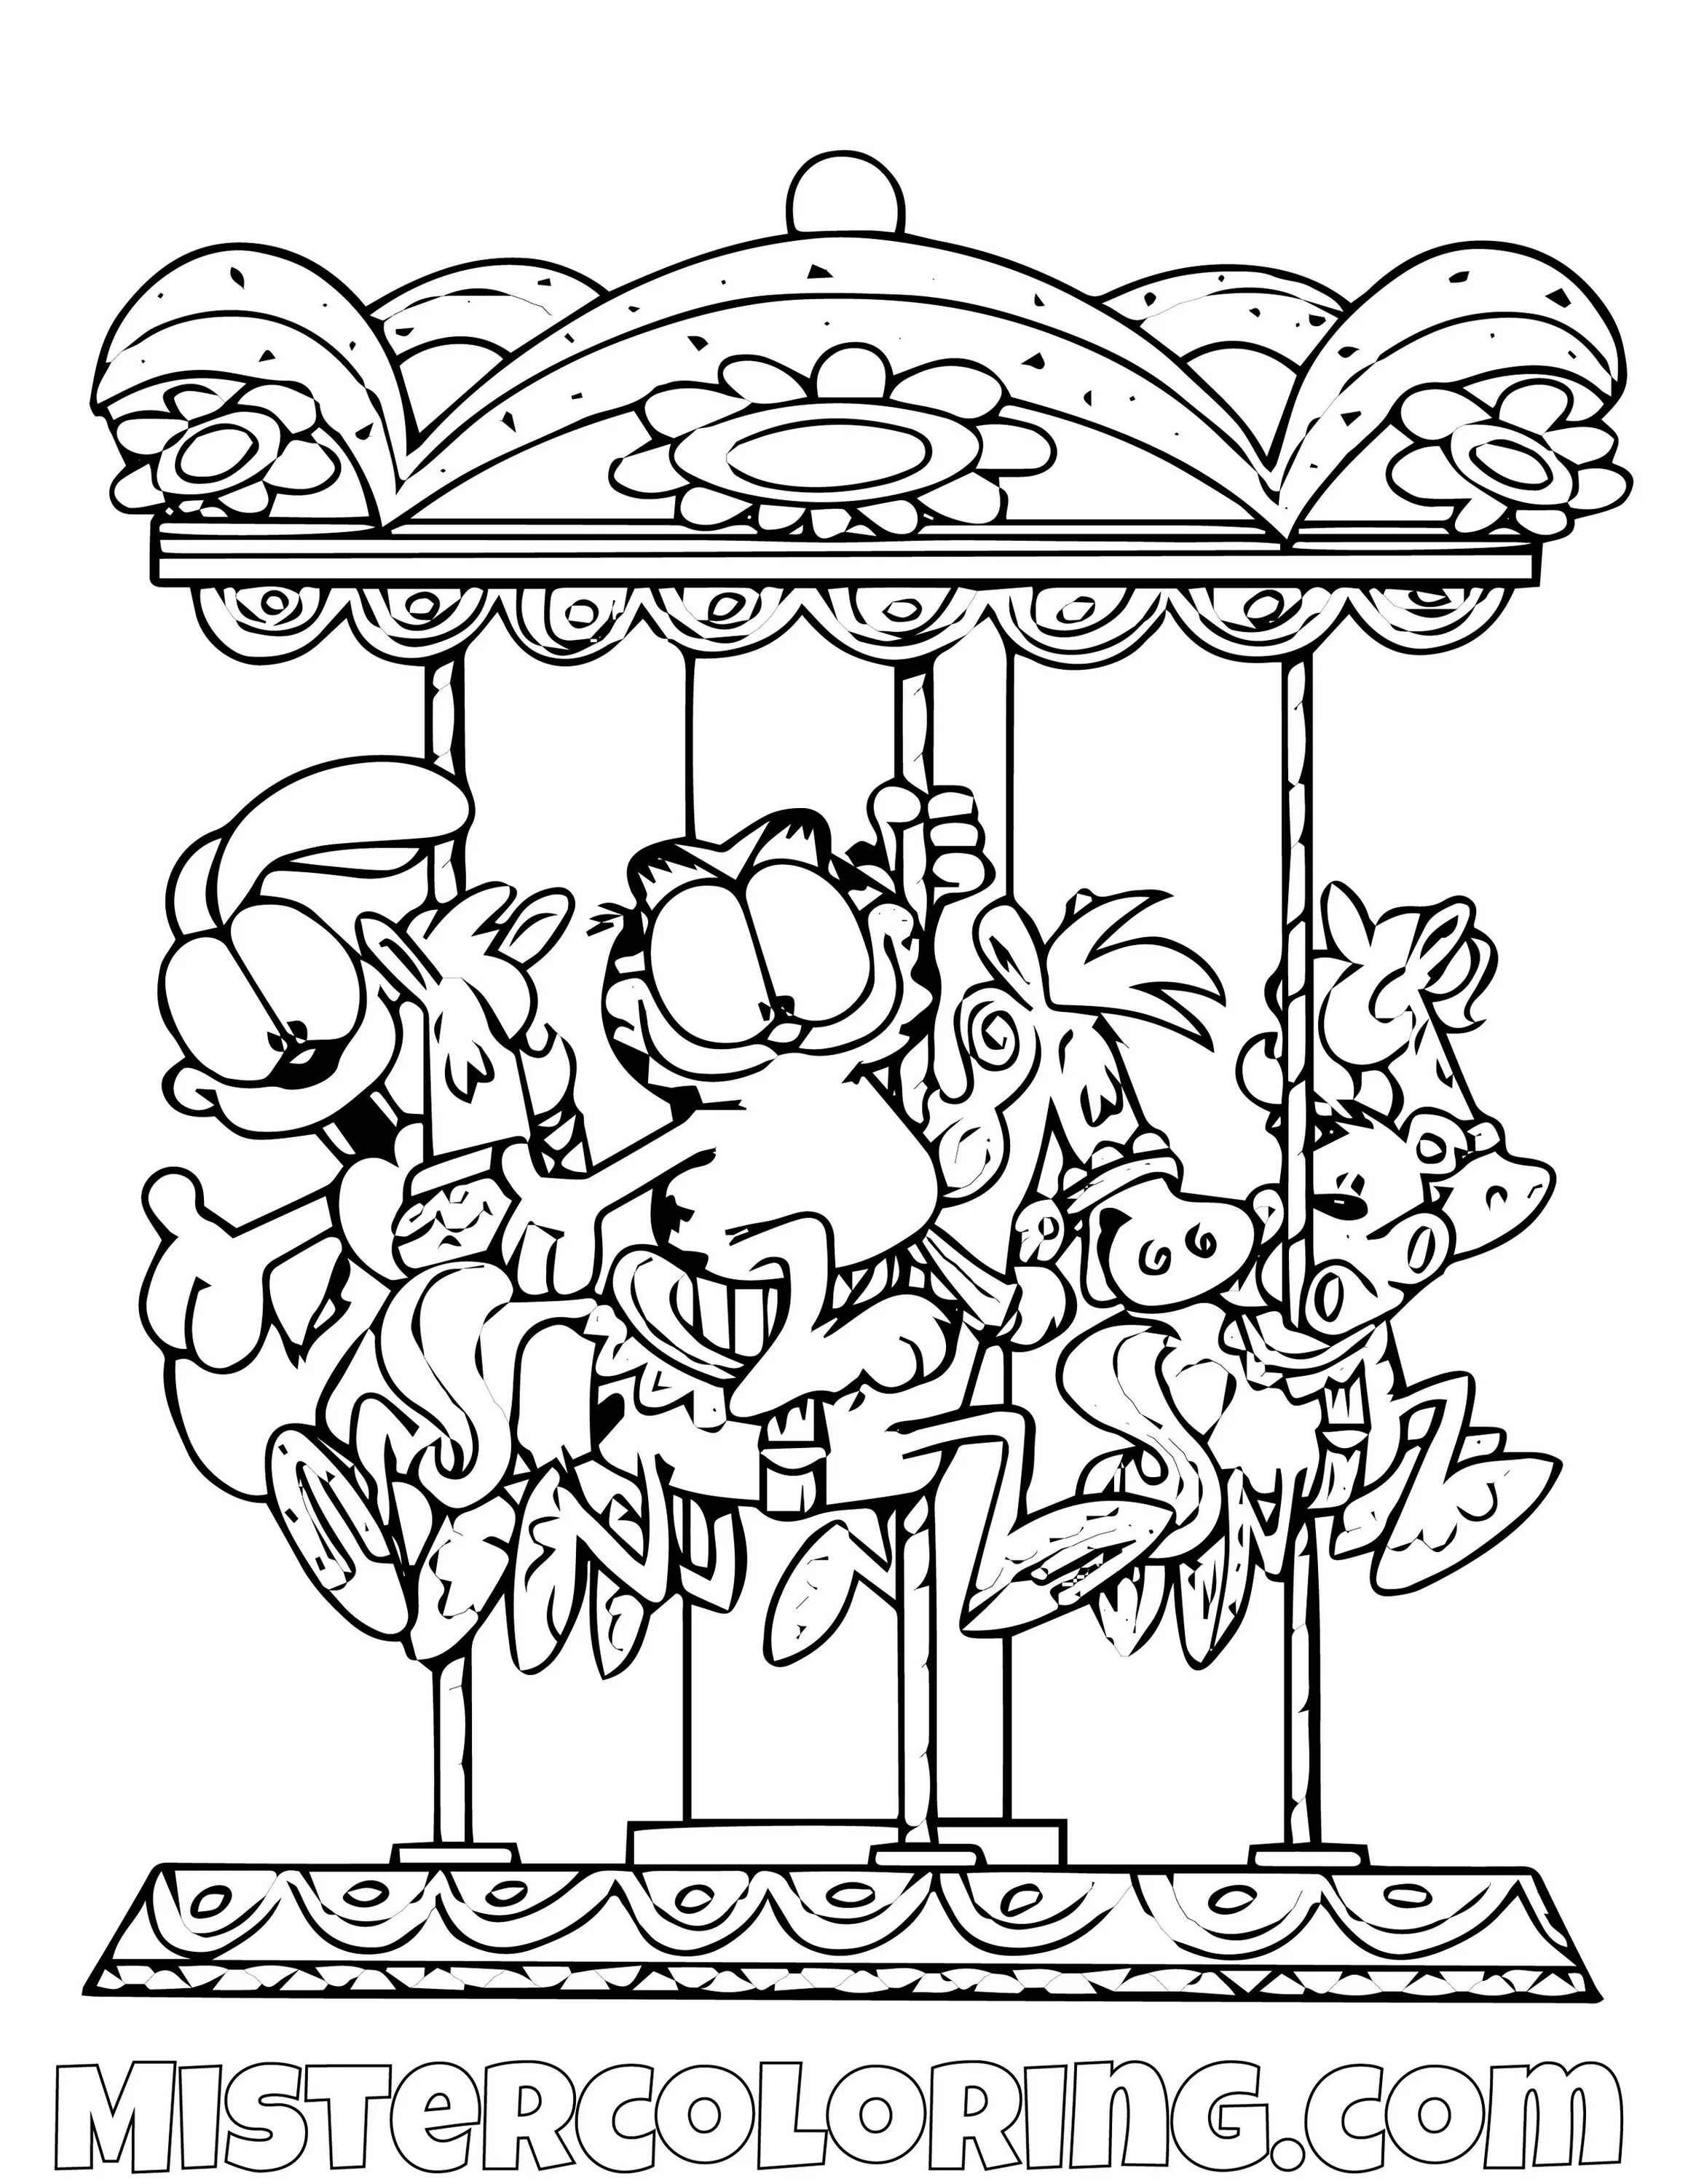 Incredible carousel coloring for kids